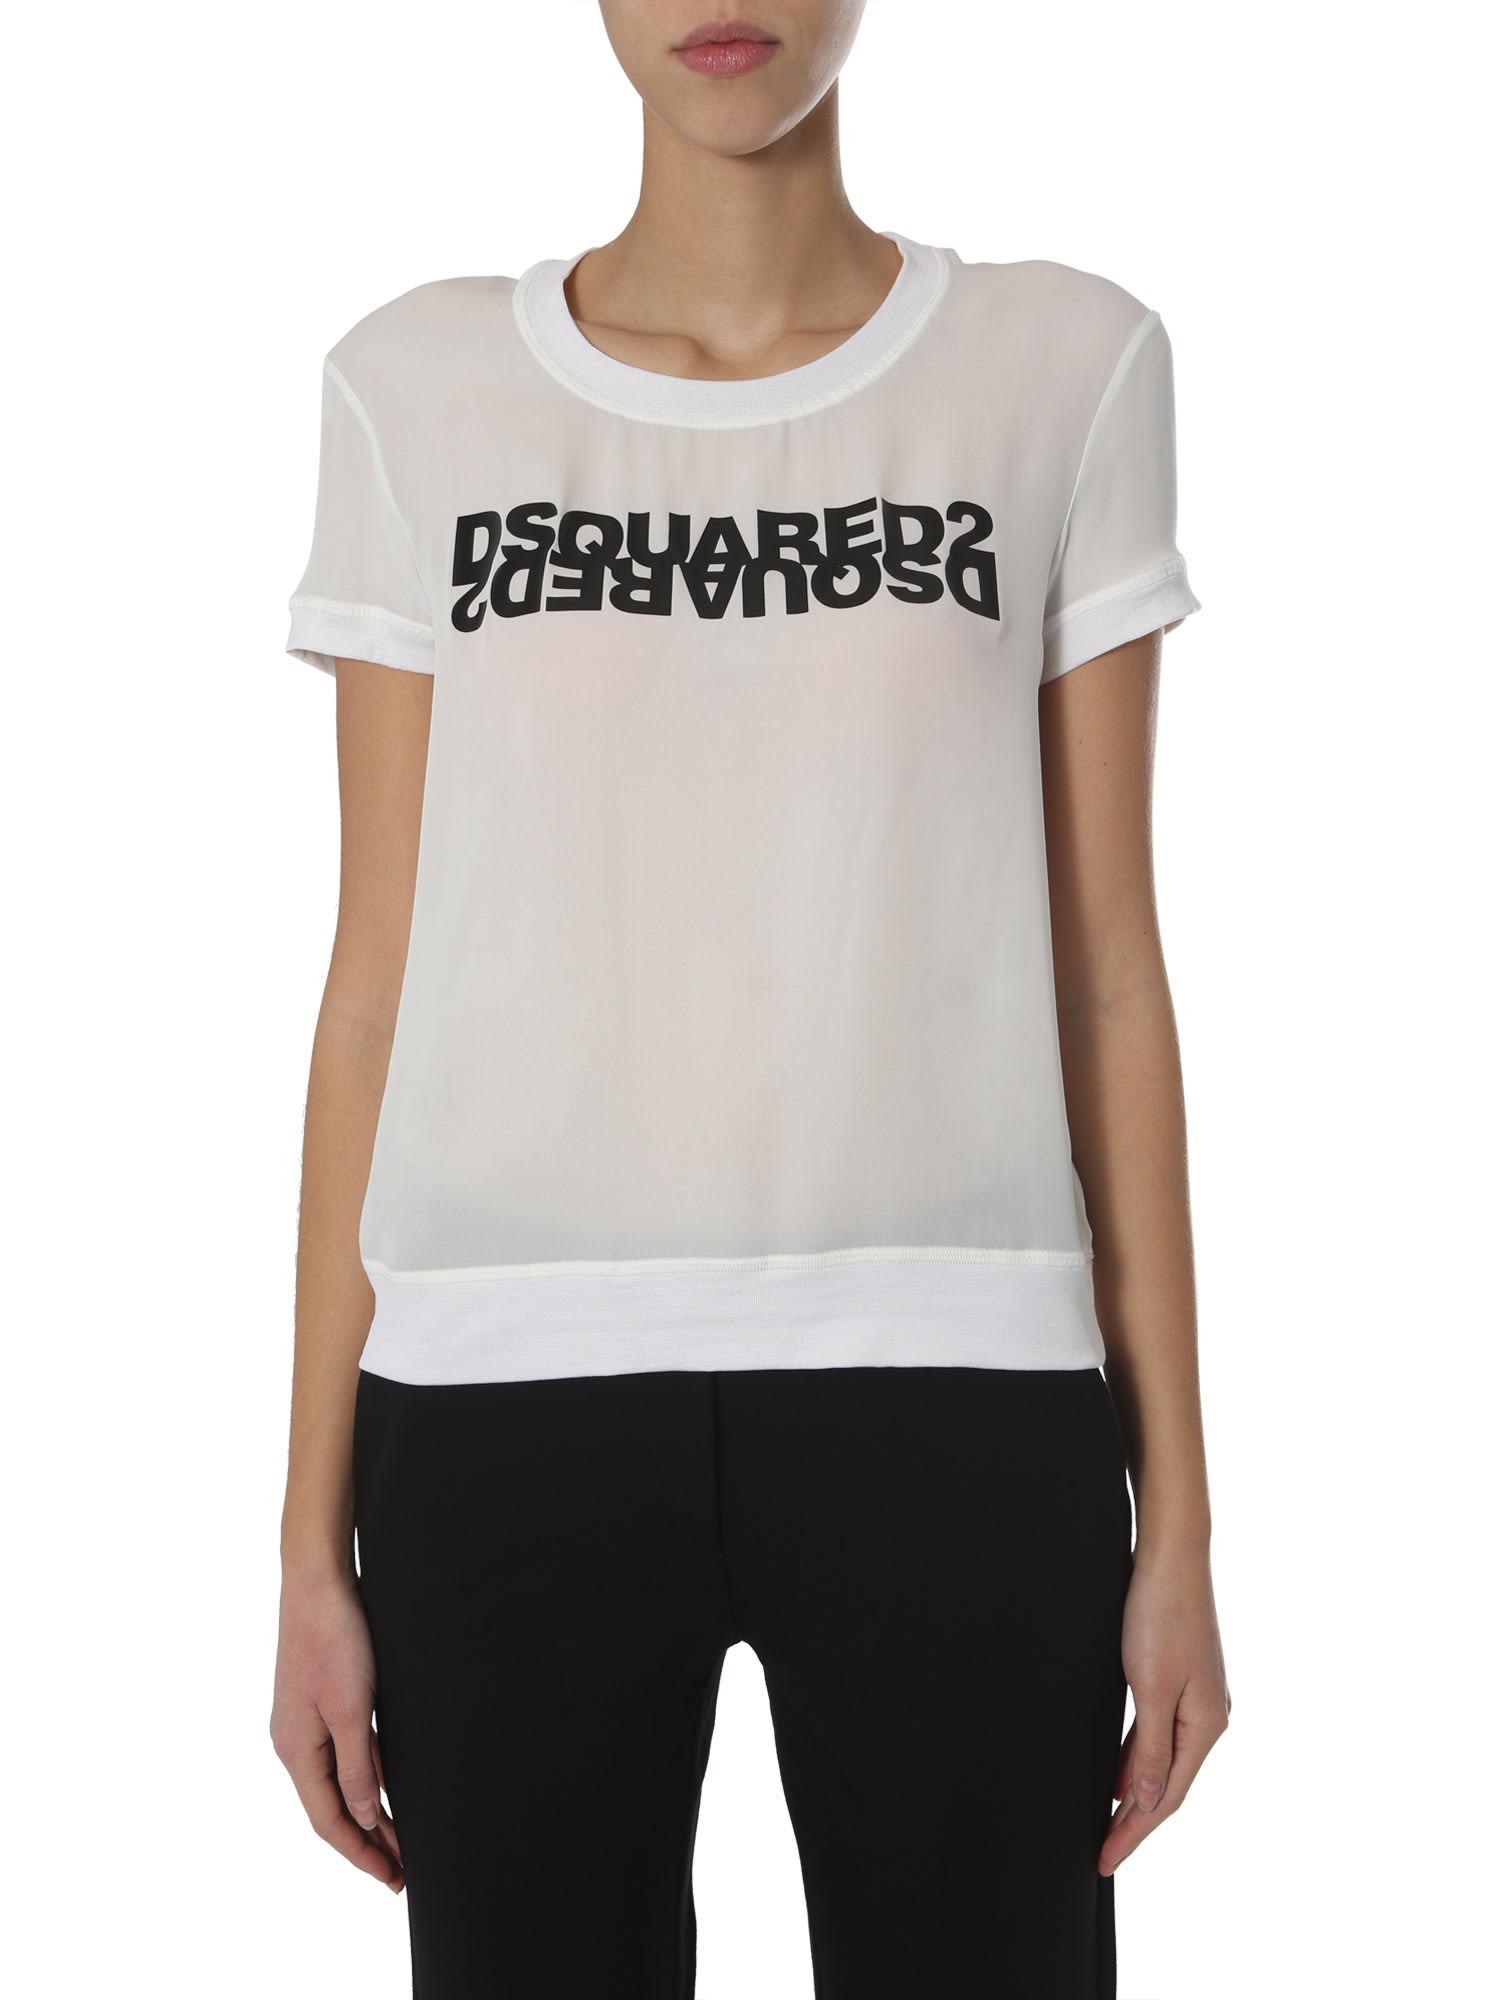 DSQUARED2 ROUND NECK T-SHIRT,S75NC0917 S52626101